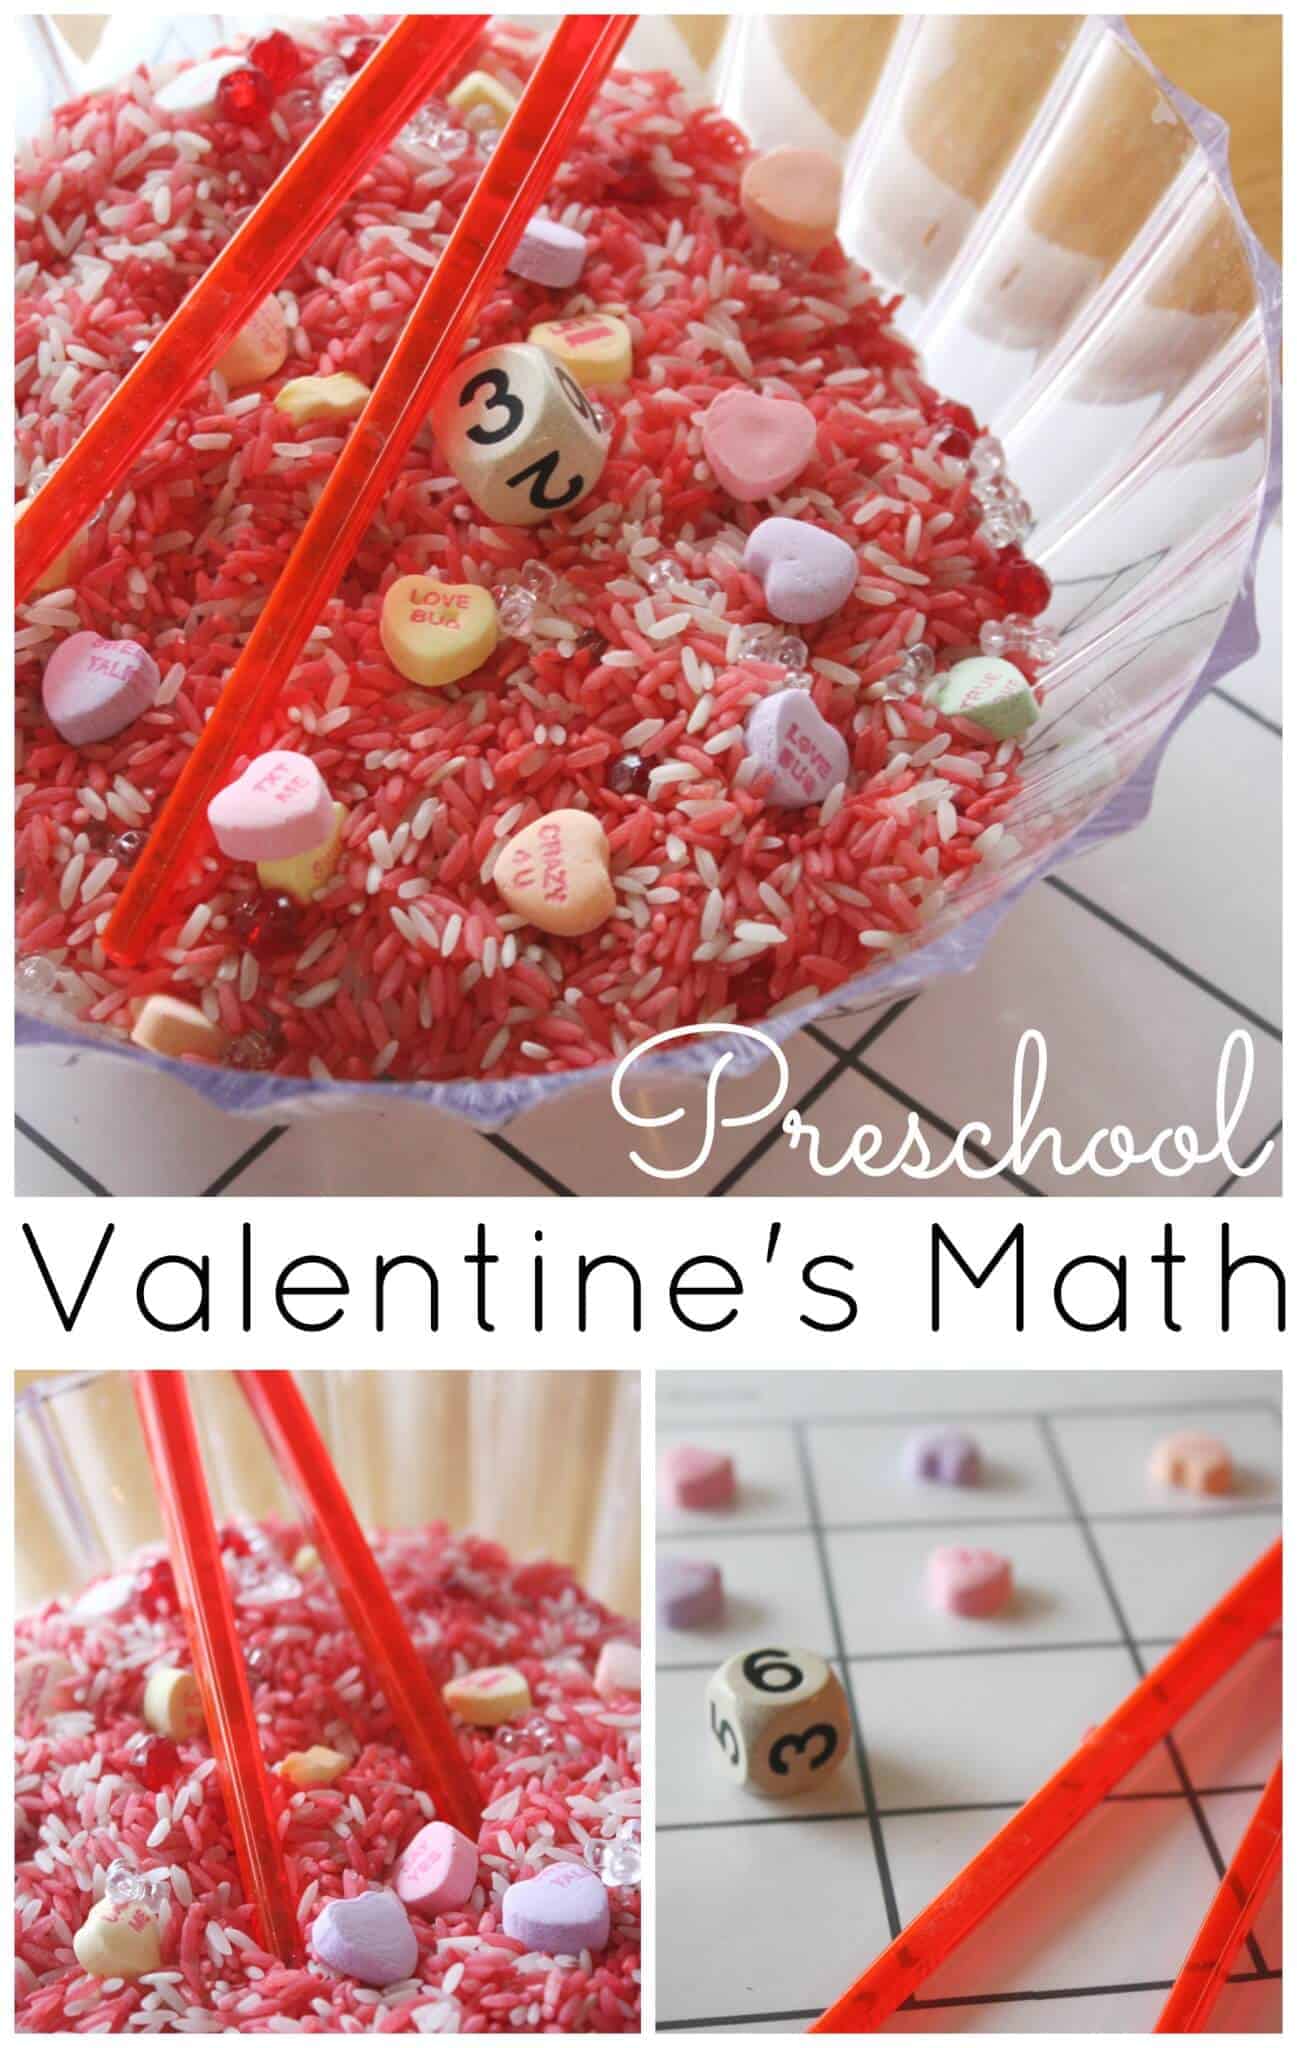 Candy Hearts Activities and Science Ideas for Valentine's Days